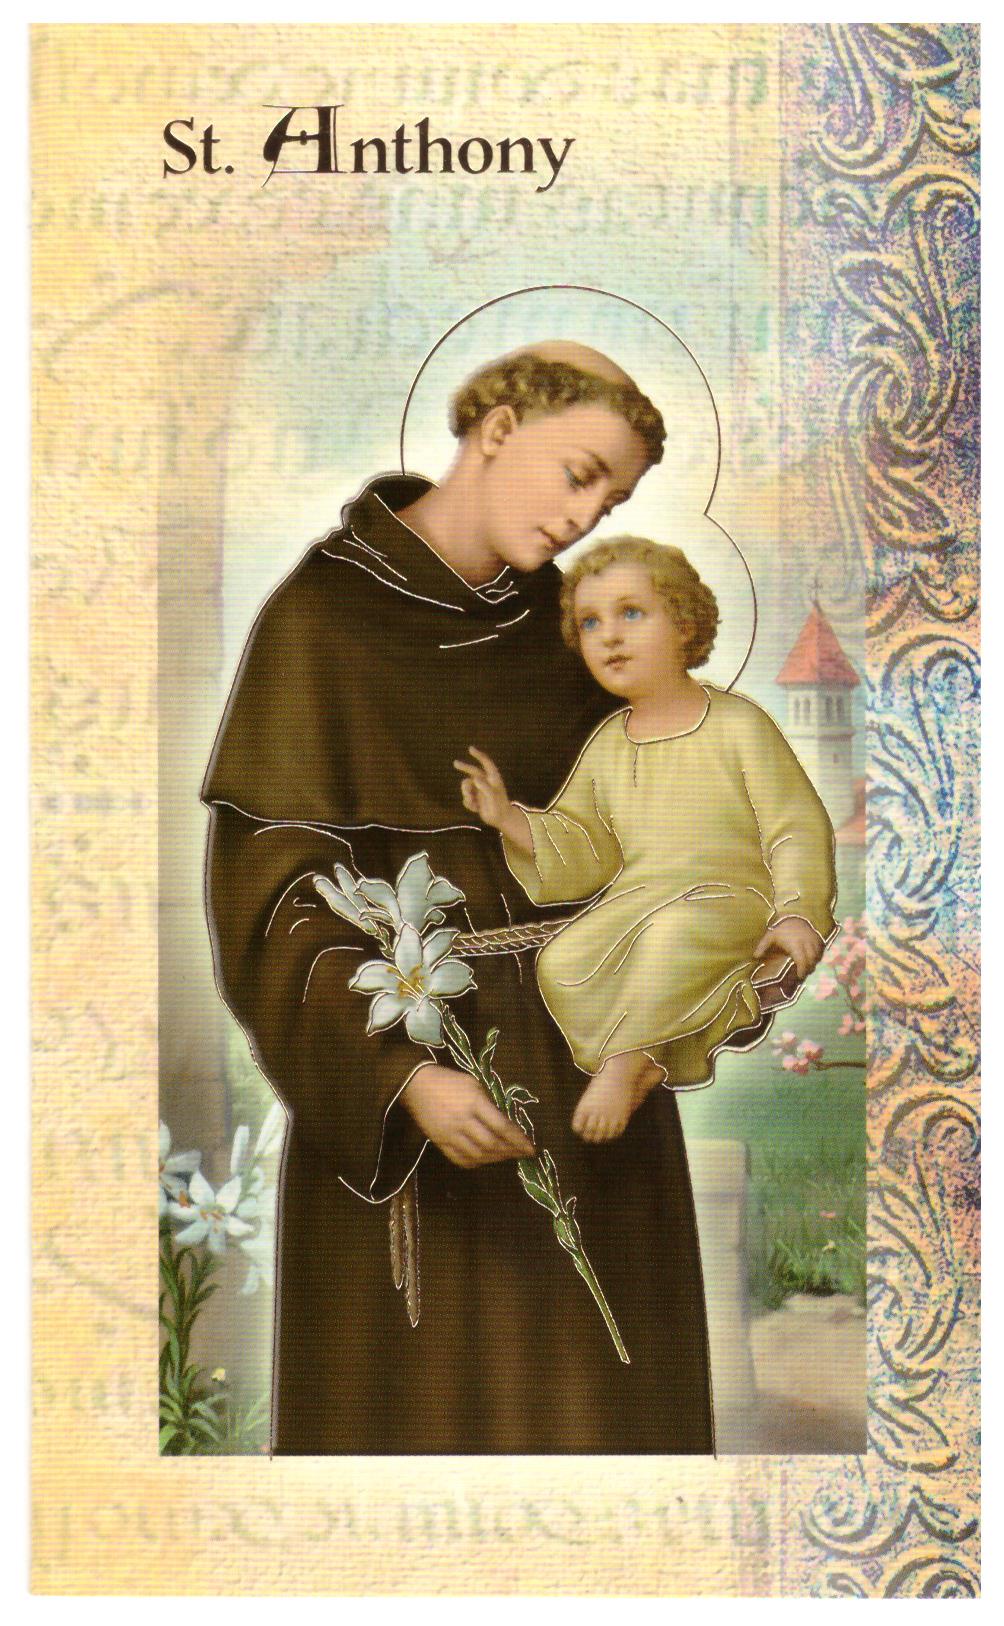 BIOGRAPHY OF ST ANTHONY